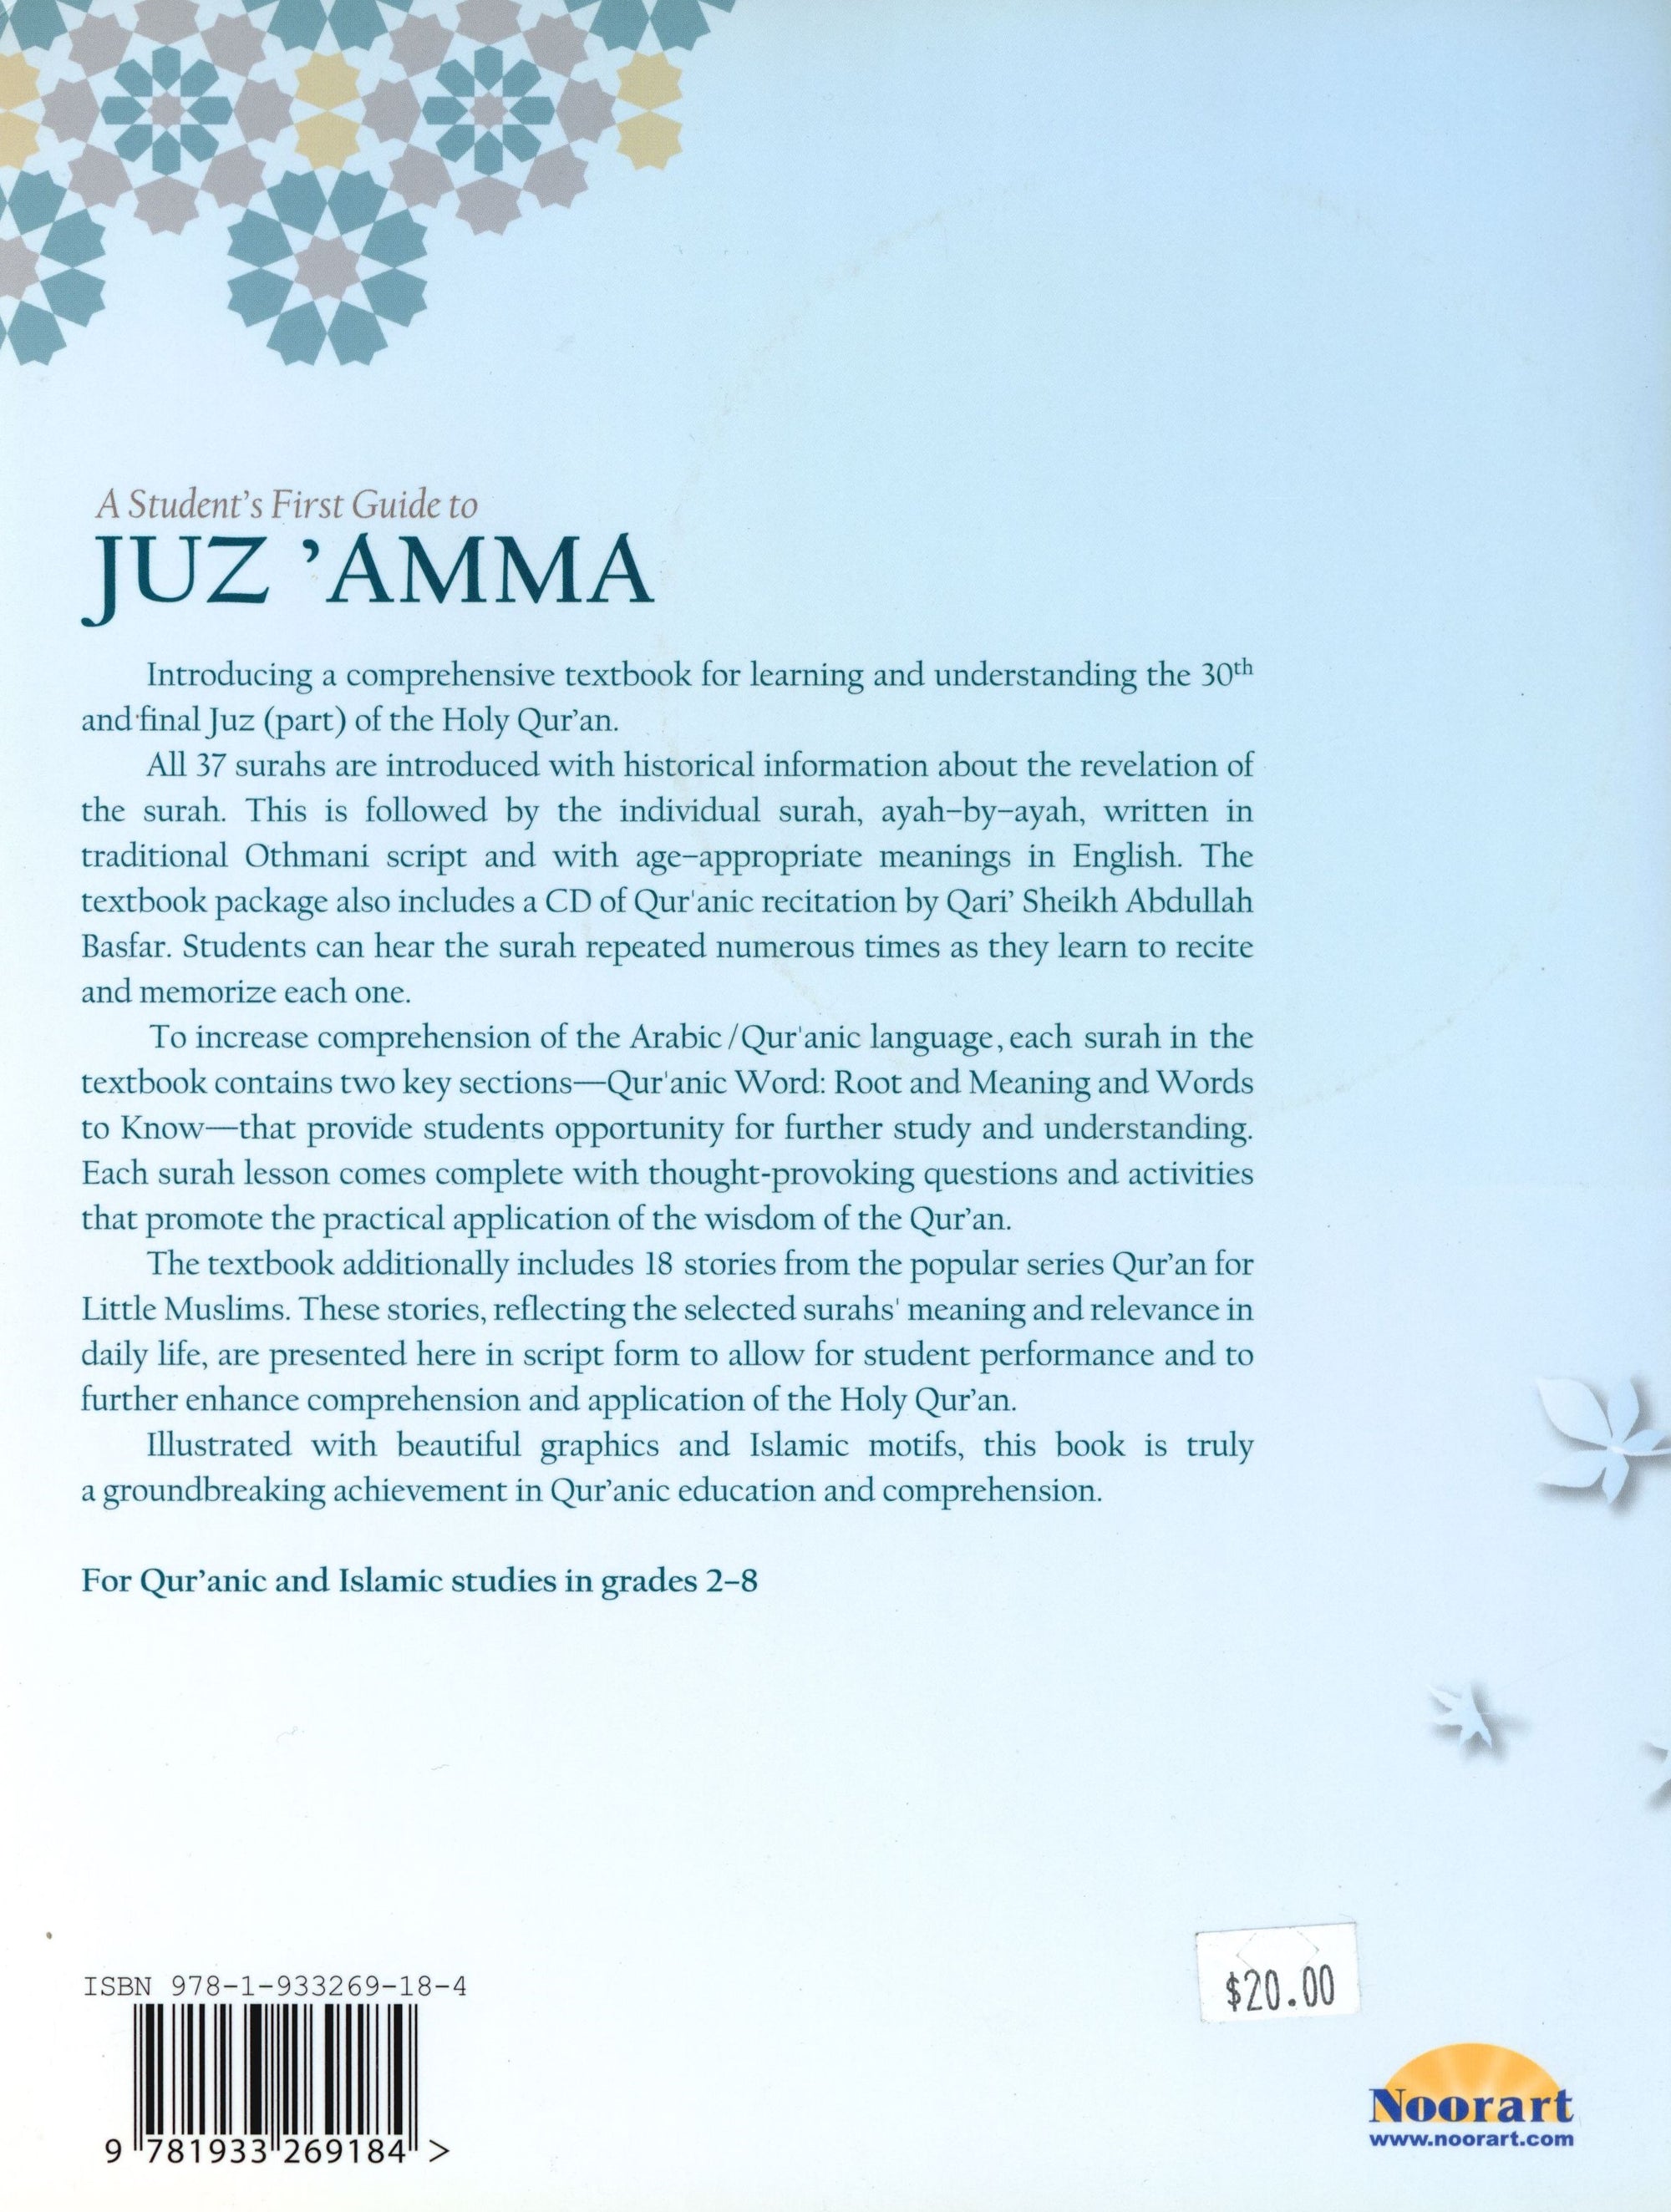 A Student's First Guide to Juz 'Amma (With MP3 CD, Part 30)